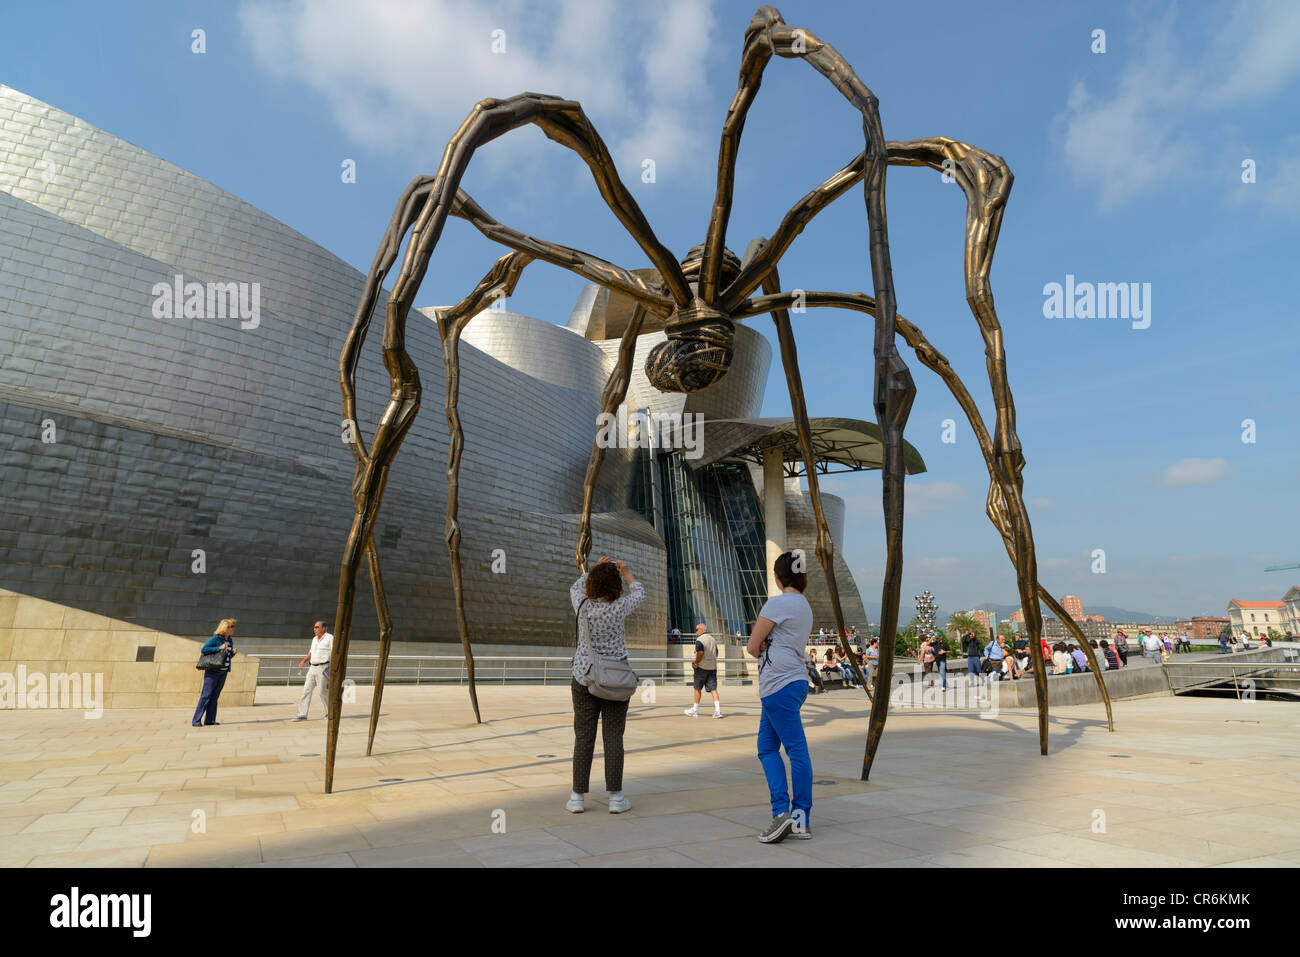 Spider Sculpture by Bourgeois at Guggenheim Museum in Bilbao,Spain Stock Photo